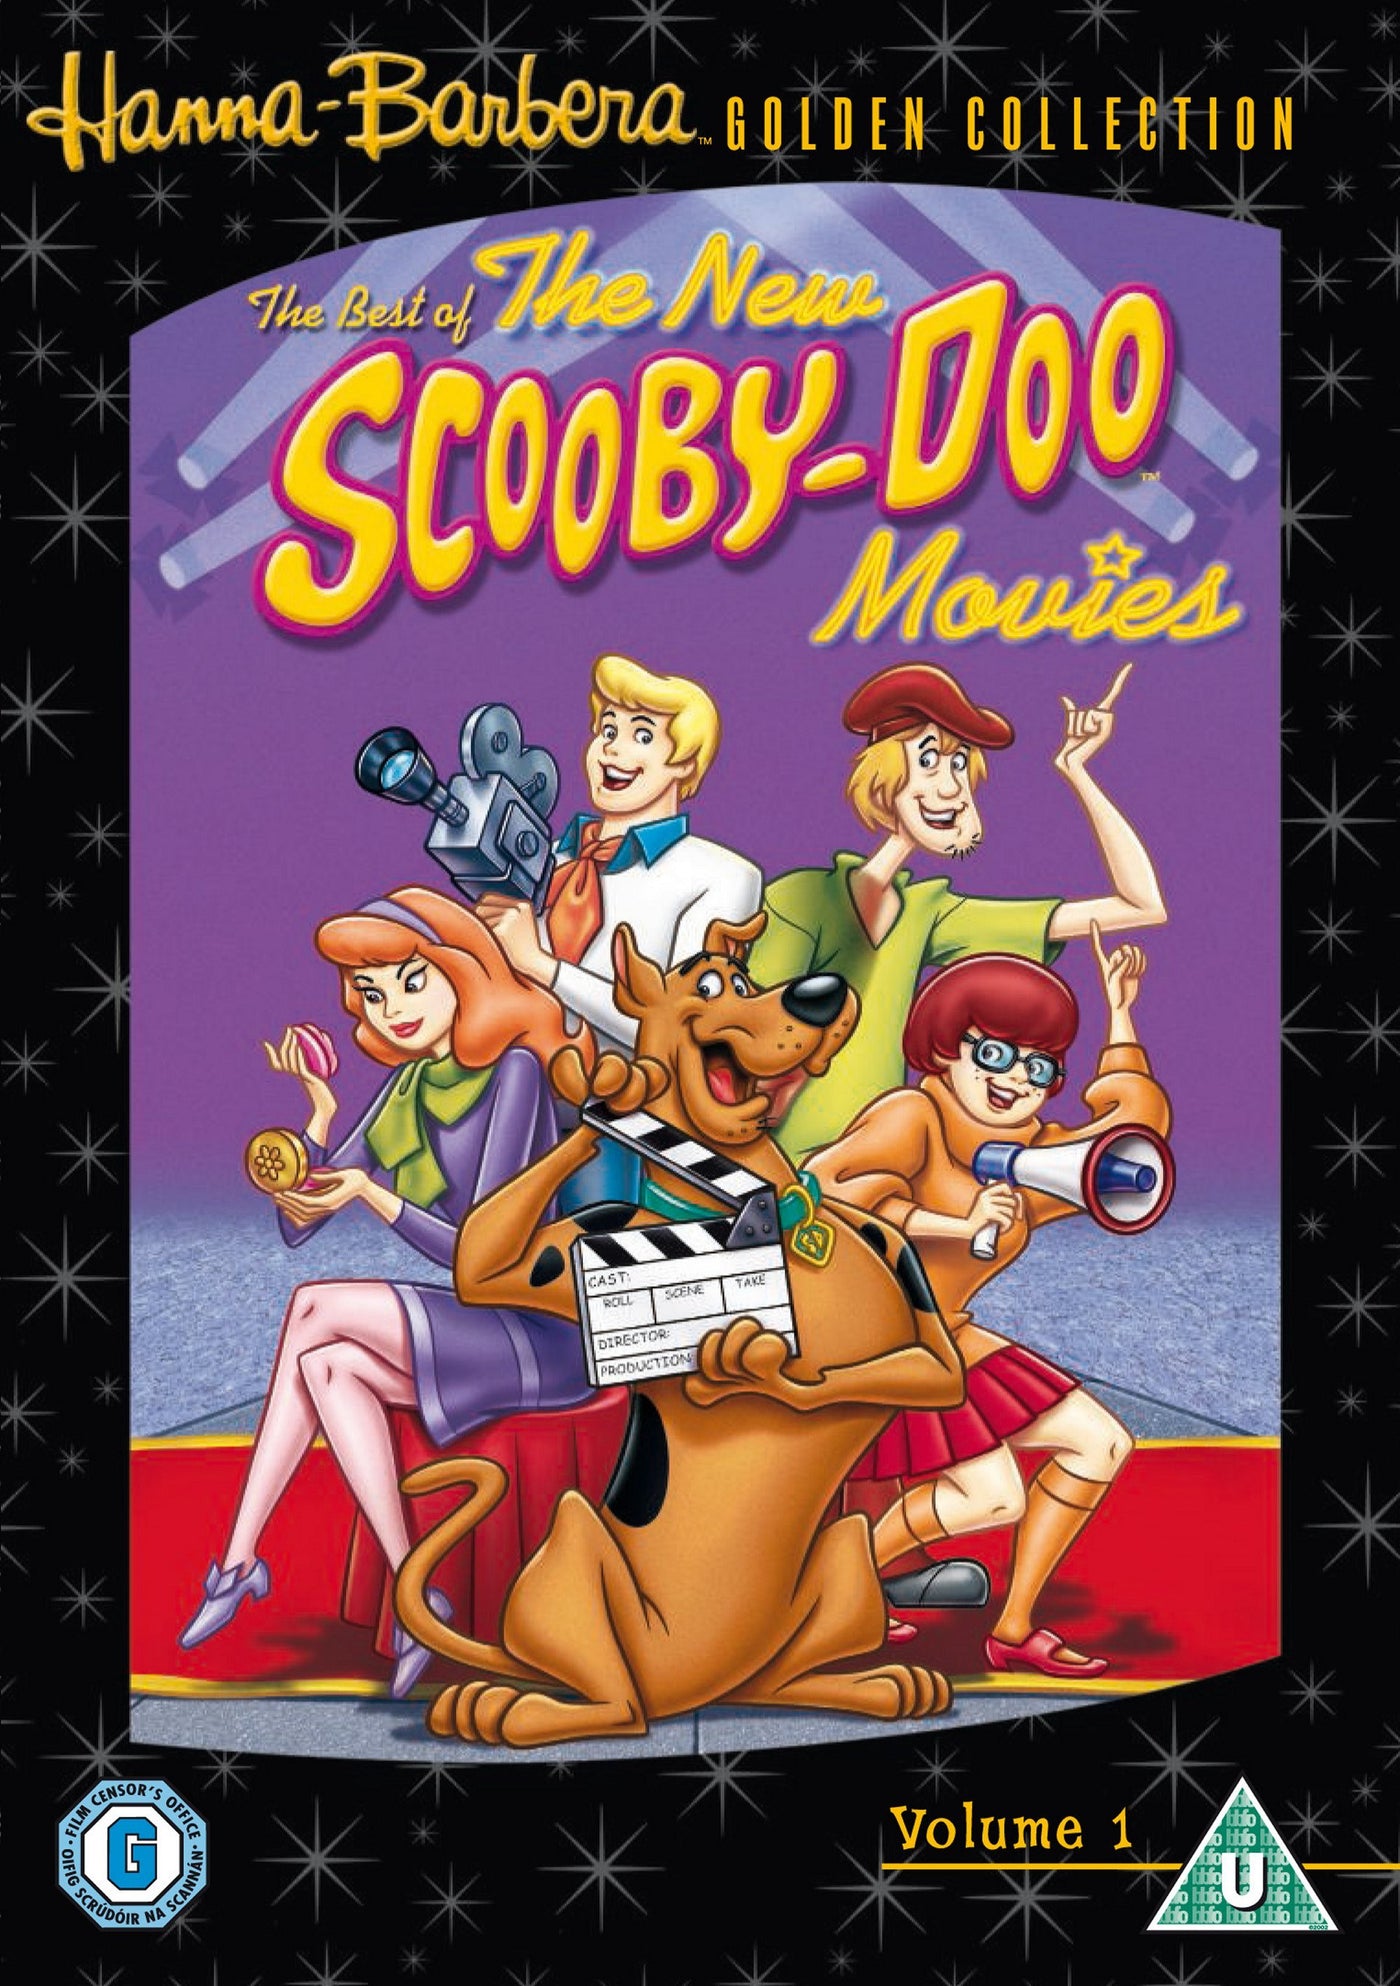 Scooby-Doo: The Best Of The New Scooby-Doo Movies - Volume 1 [2005] (DVD)